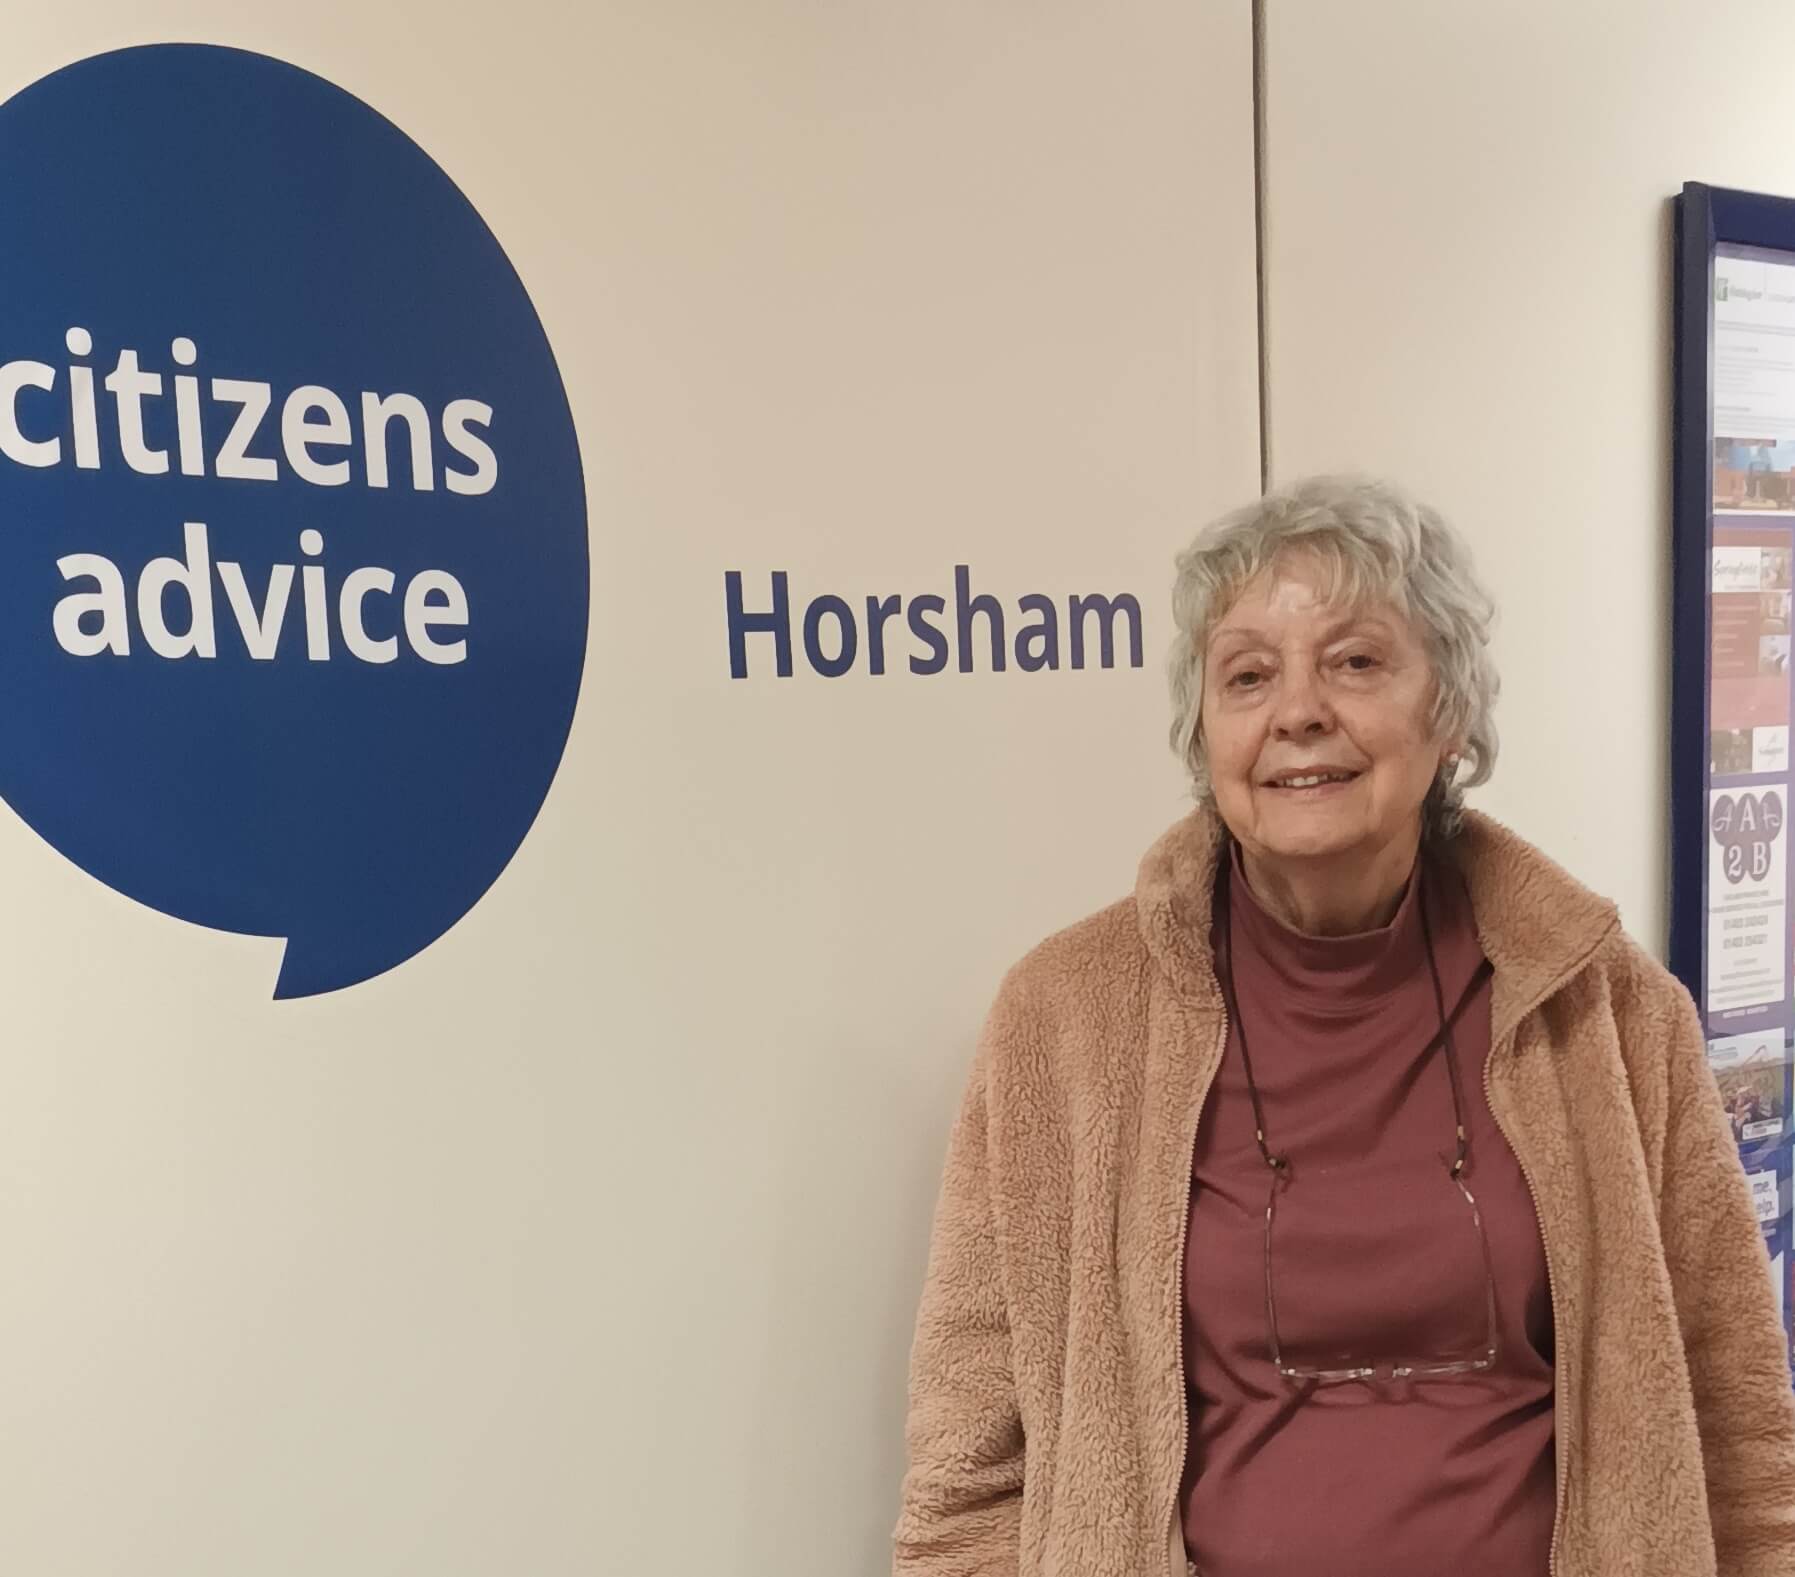 Fiona contributes over 44 years of volunteering service to local Citizens Advice offices